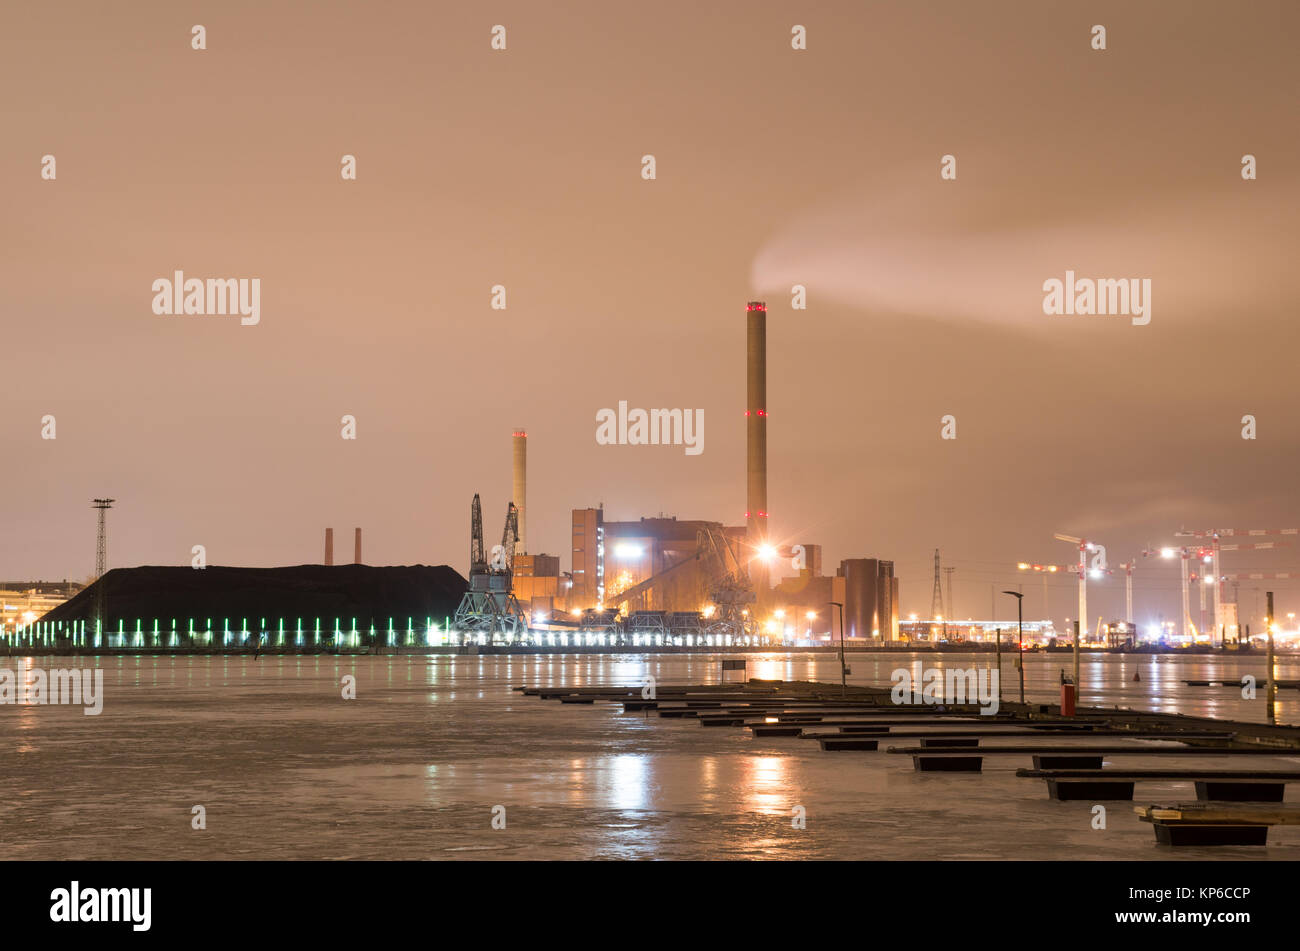 A long exposure night scene of the coal power plant in Helsinki as seen from opposite shore. Stock Photo